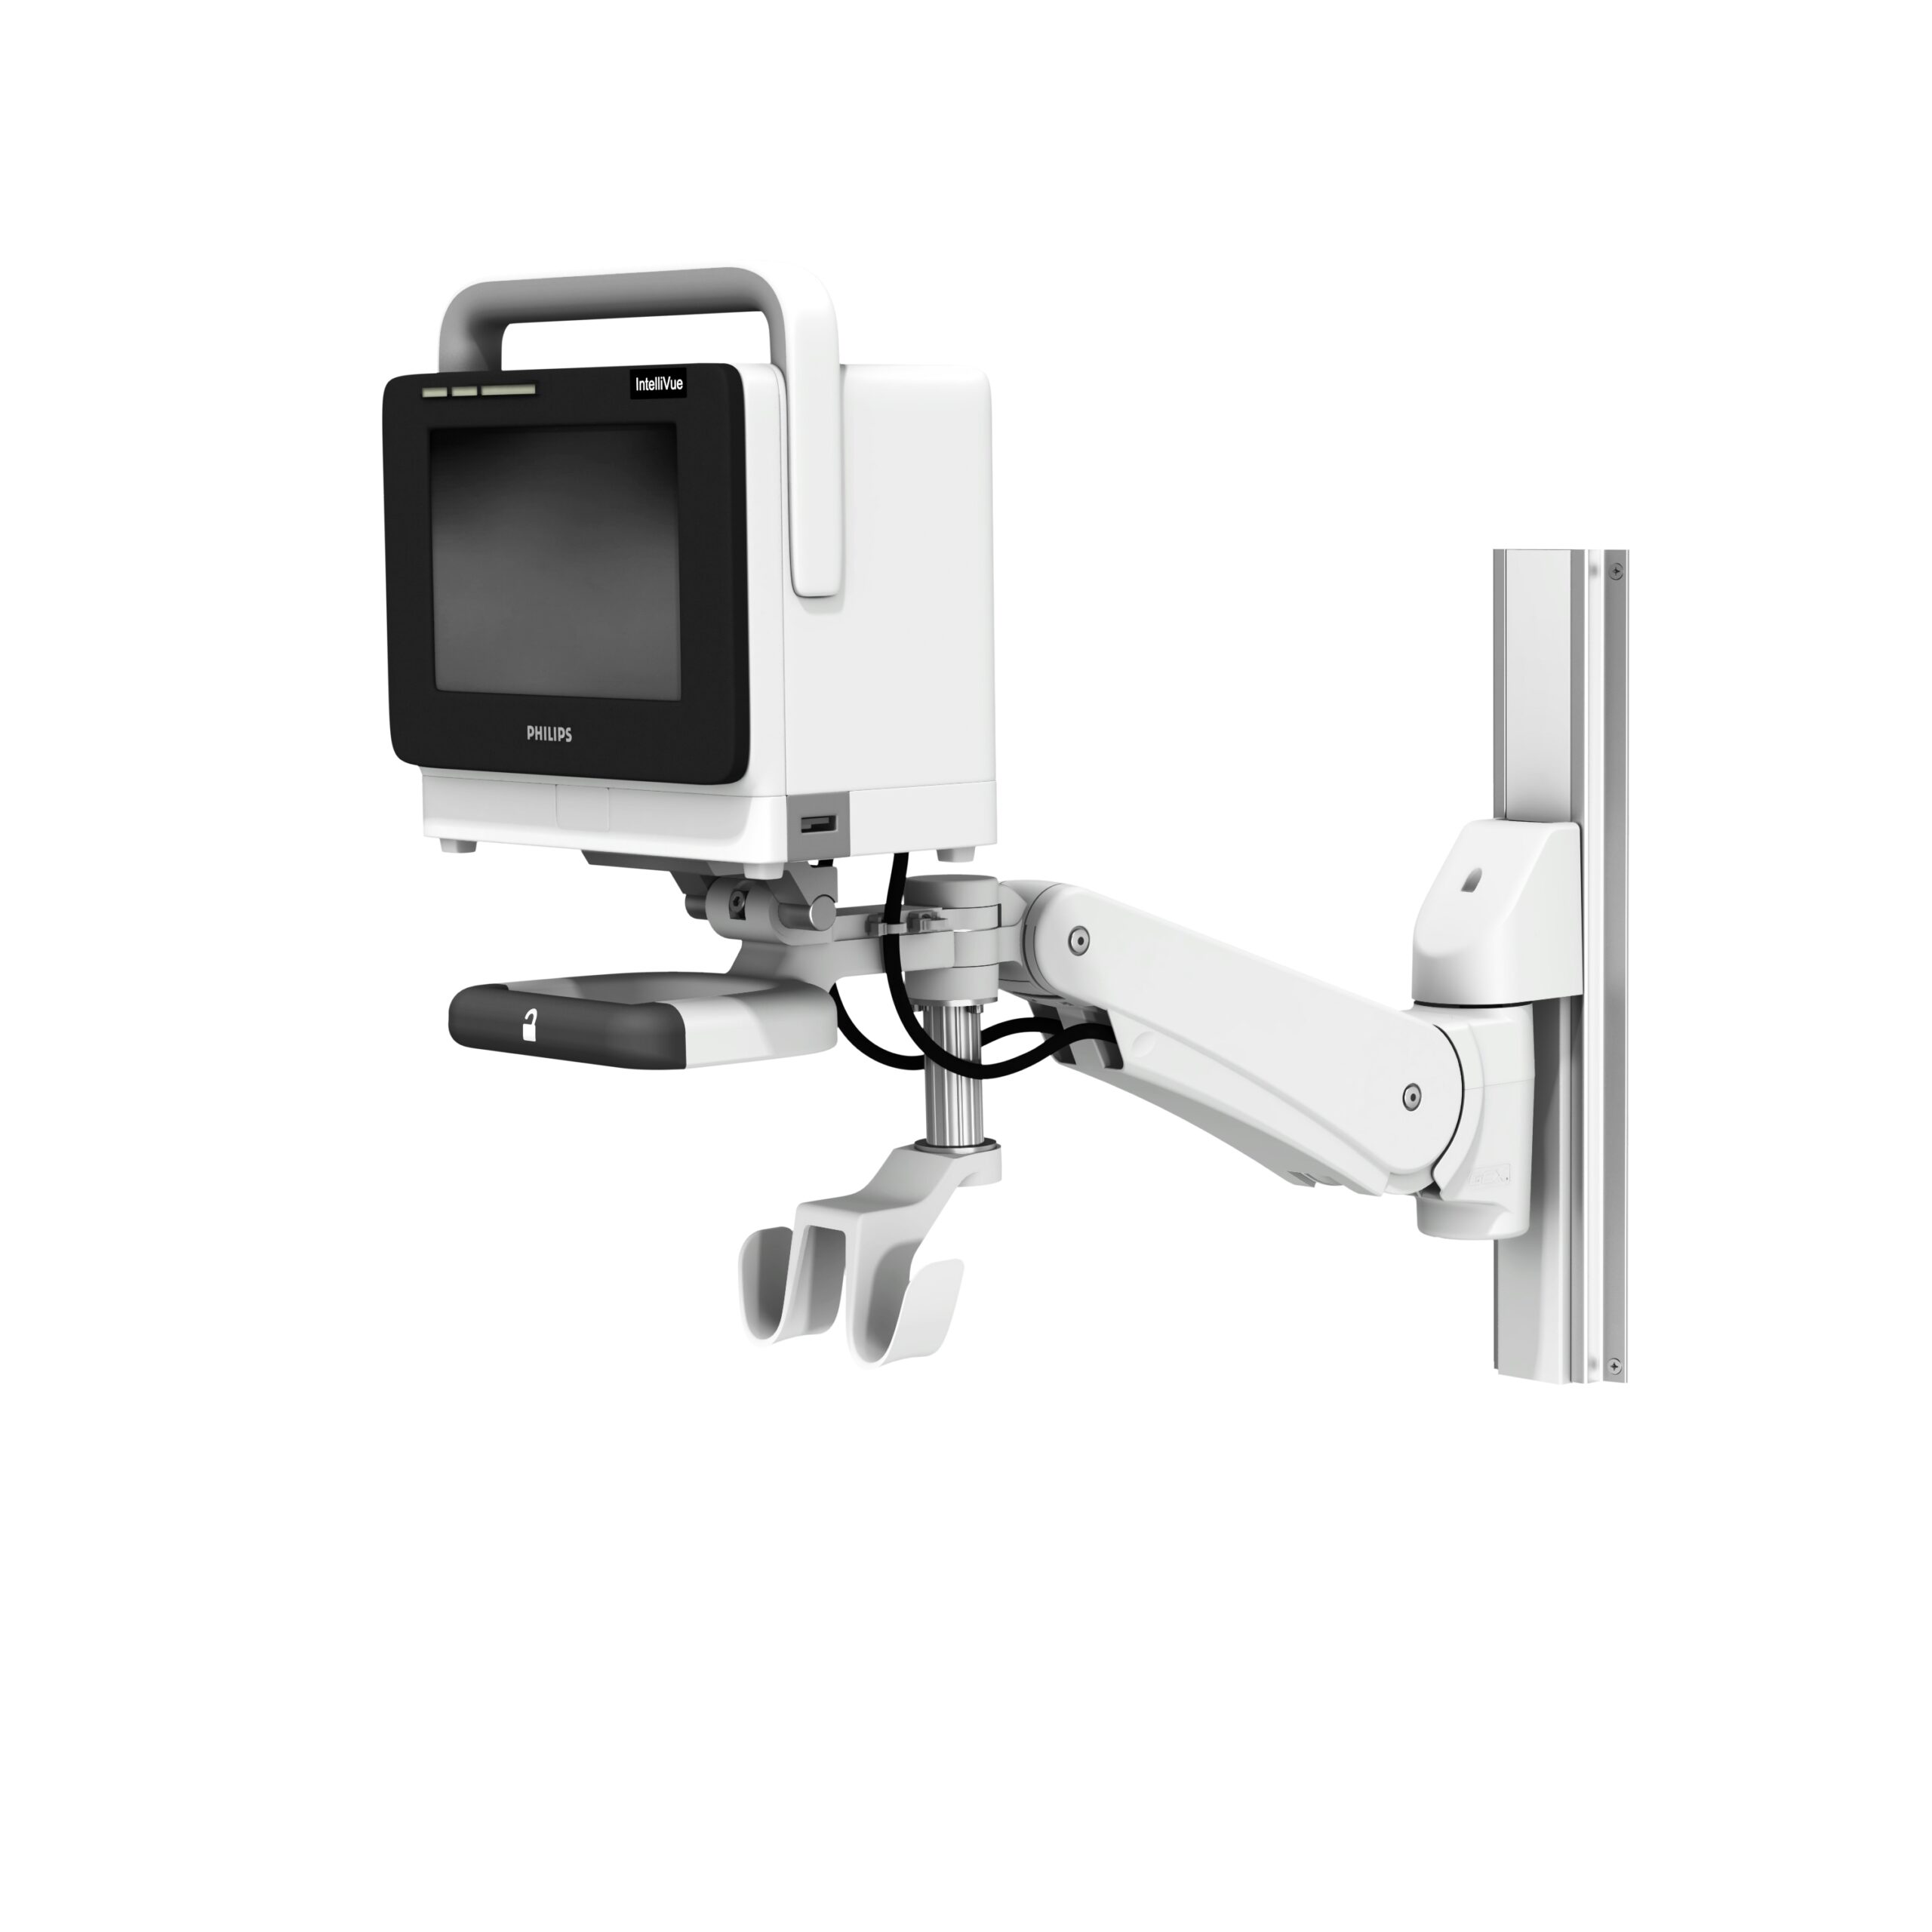 VHM-PL (Locking) Variable Height Arm for IntelliVue MP20/30/40/50